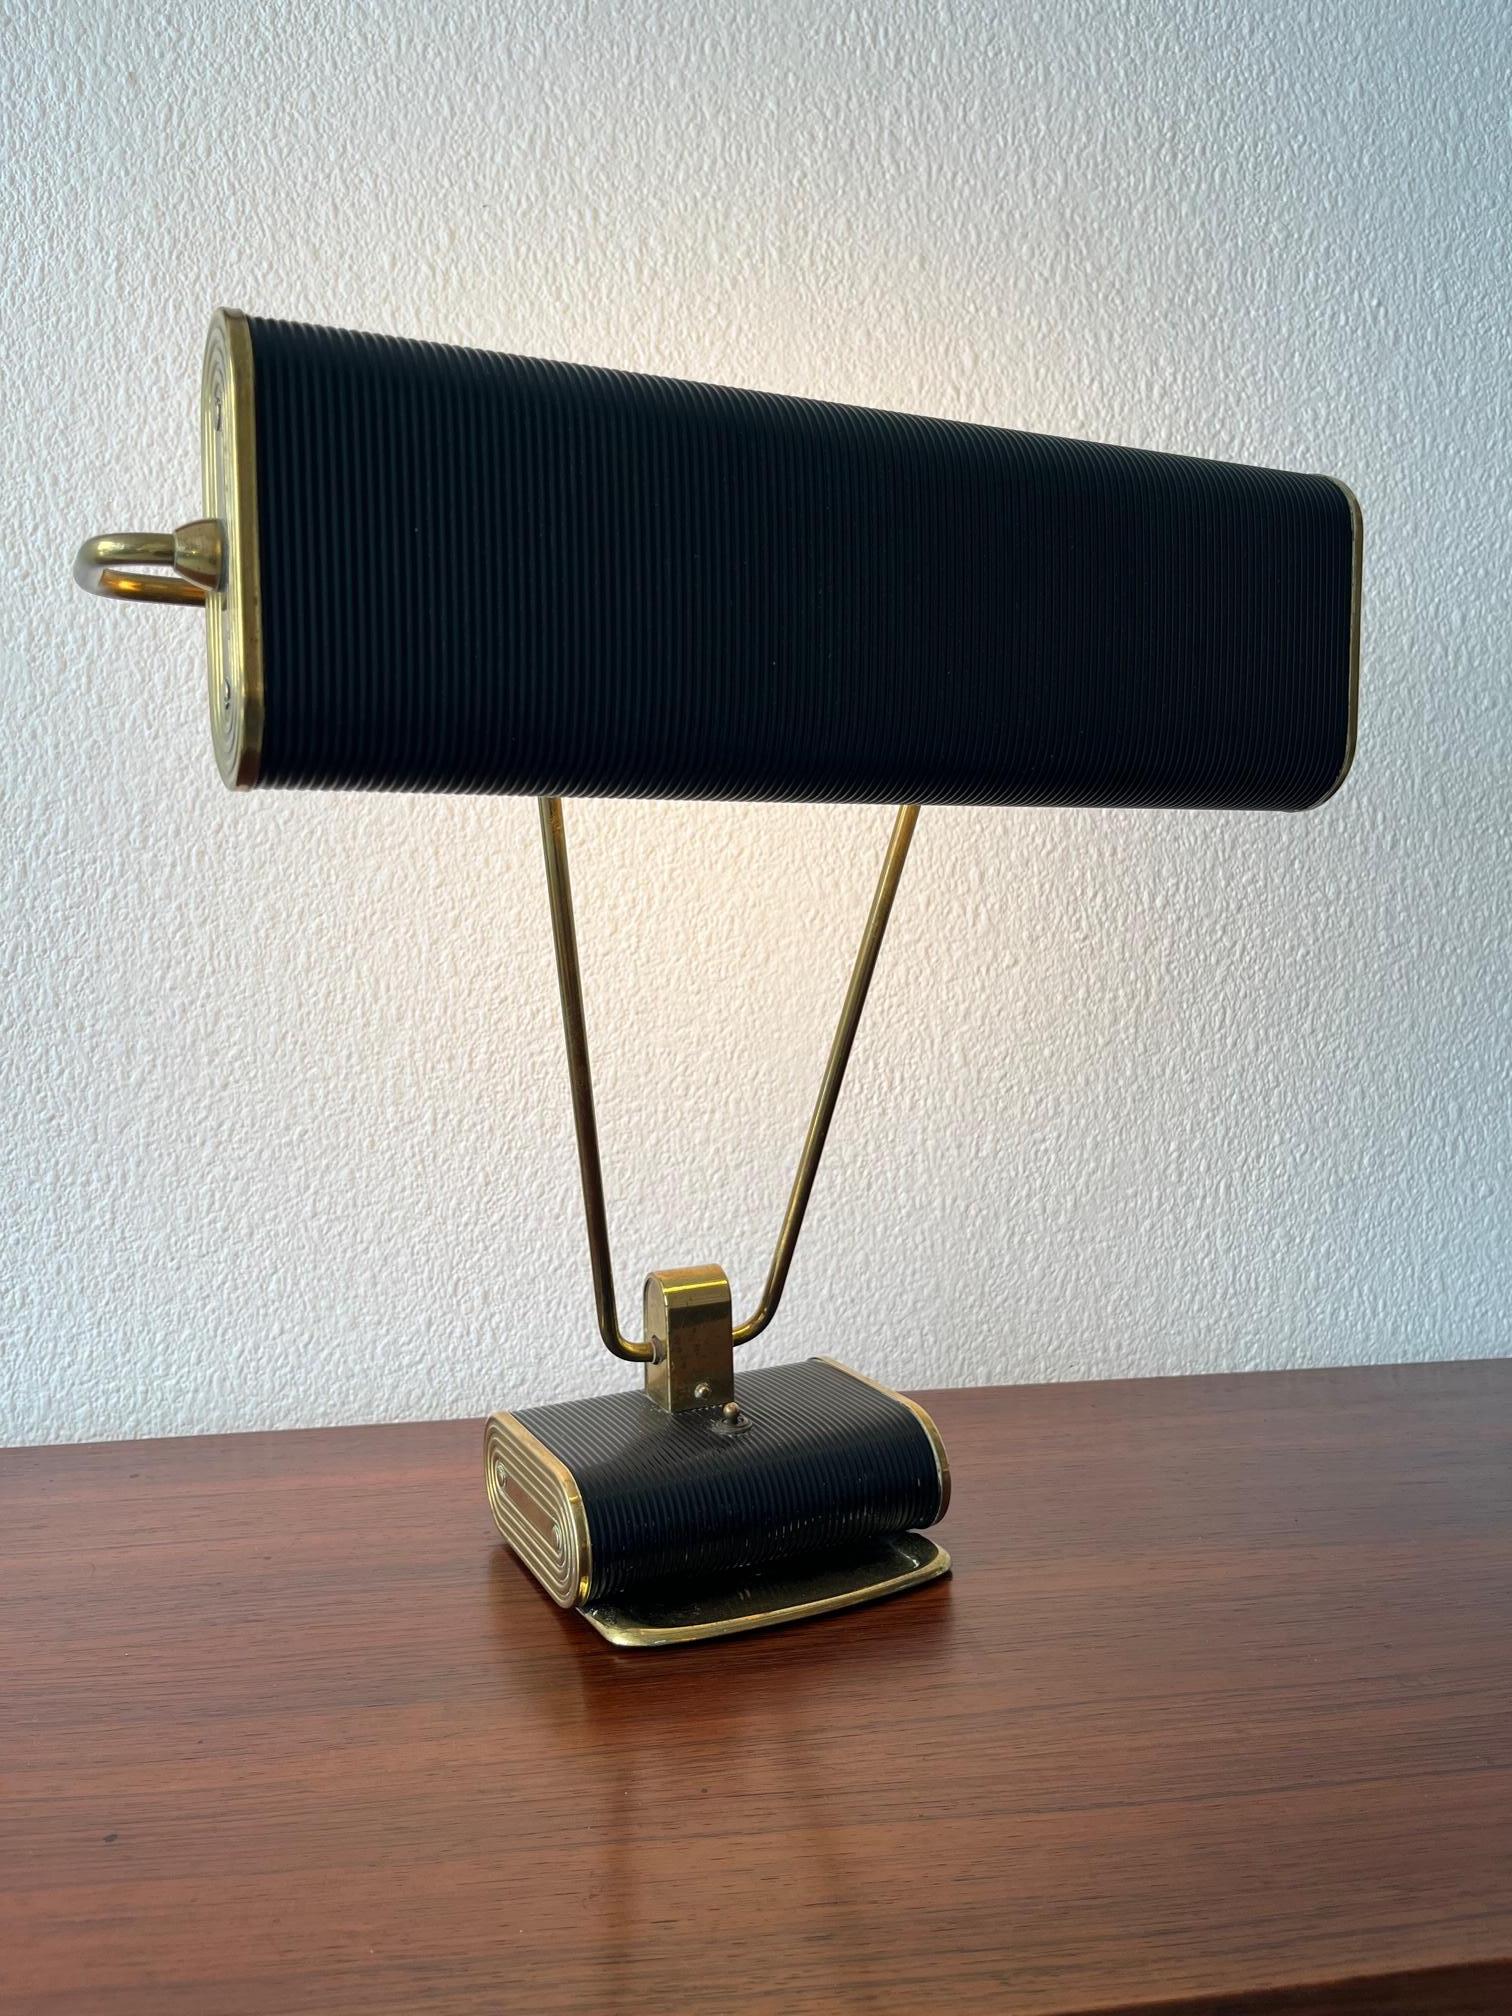 French Brass & Aluminum Adjustable Desk Lamp by Eileen Gray for Jumo, France ca. 1940s For Sale